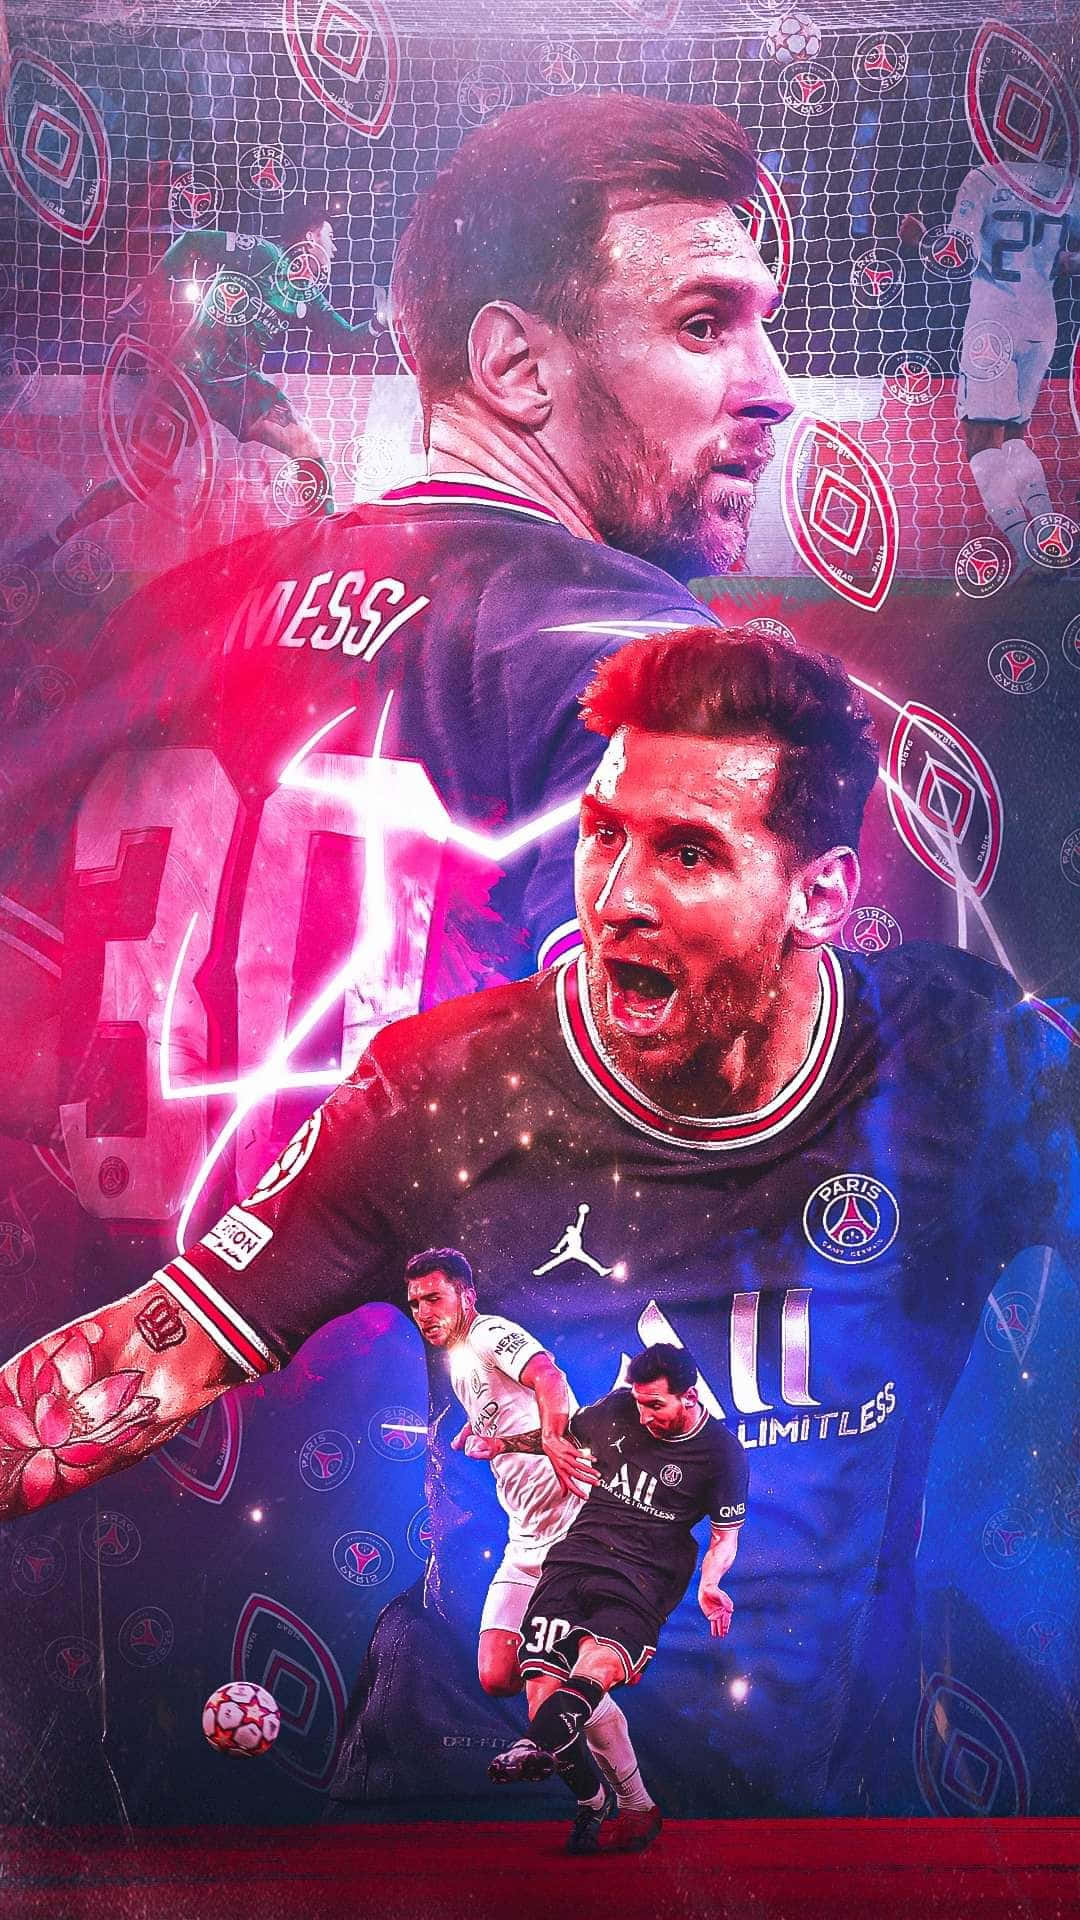 “Messi Cool: looking cool in the heat of competition.” Wallpaper